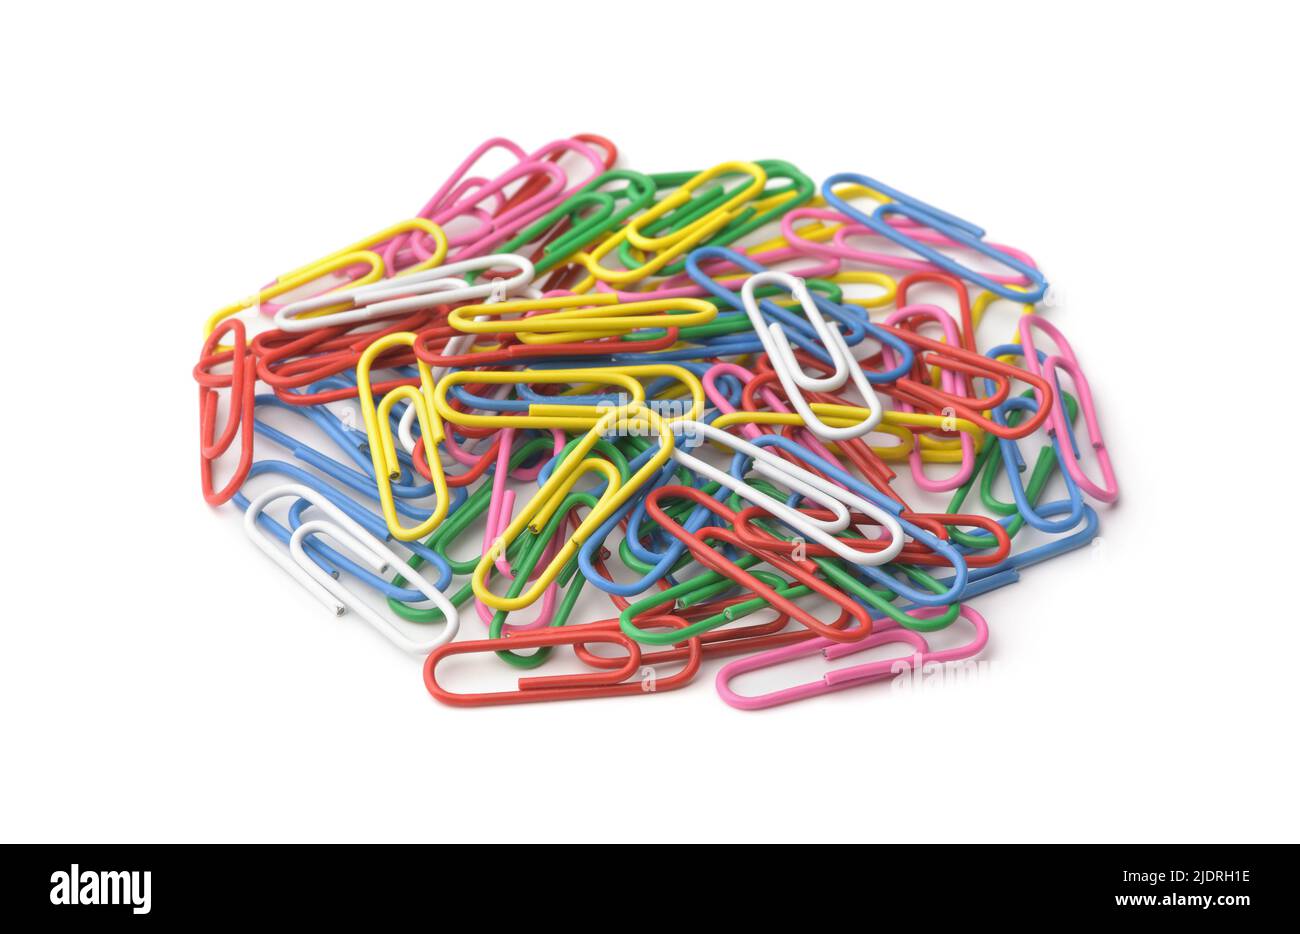 Group of colorful paper clips isolated on white Stock Photo